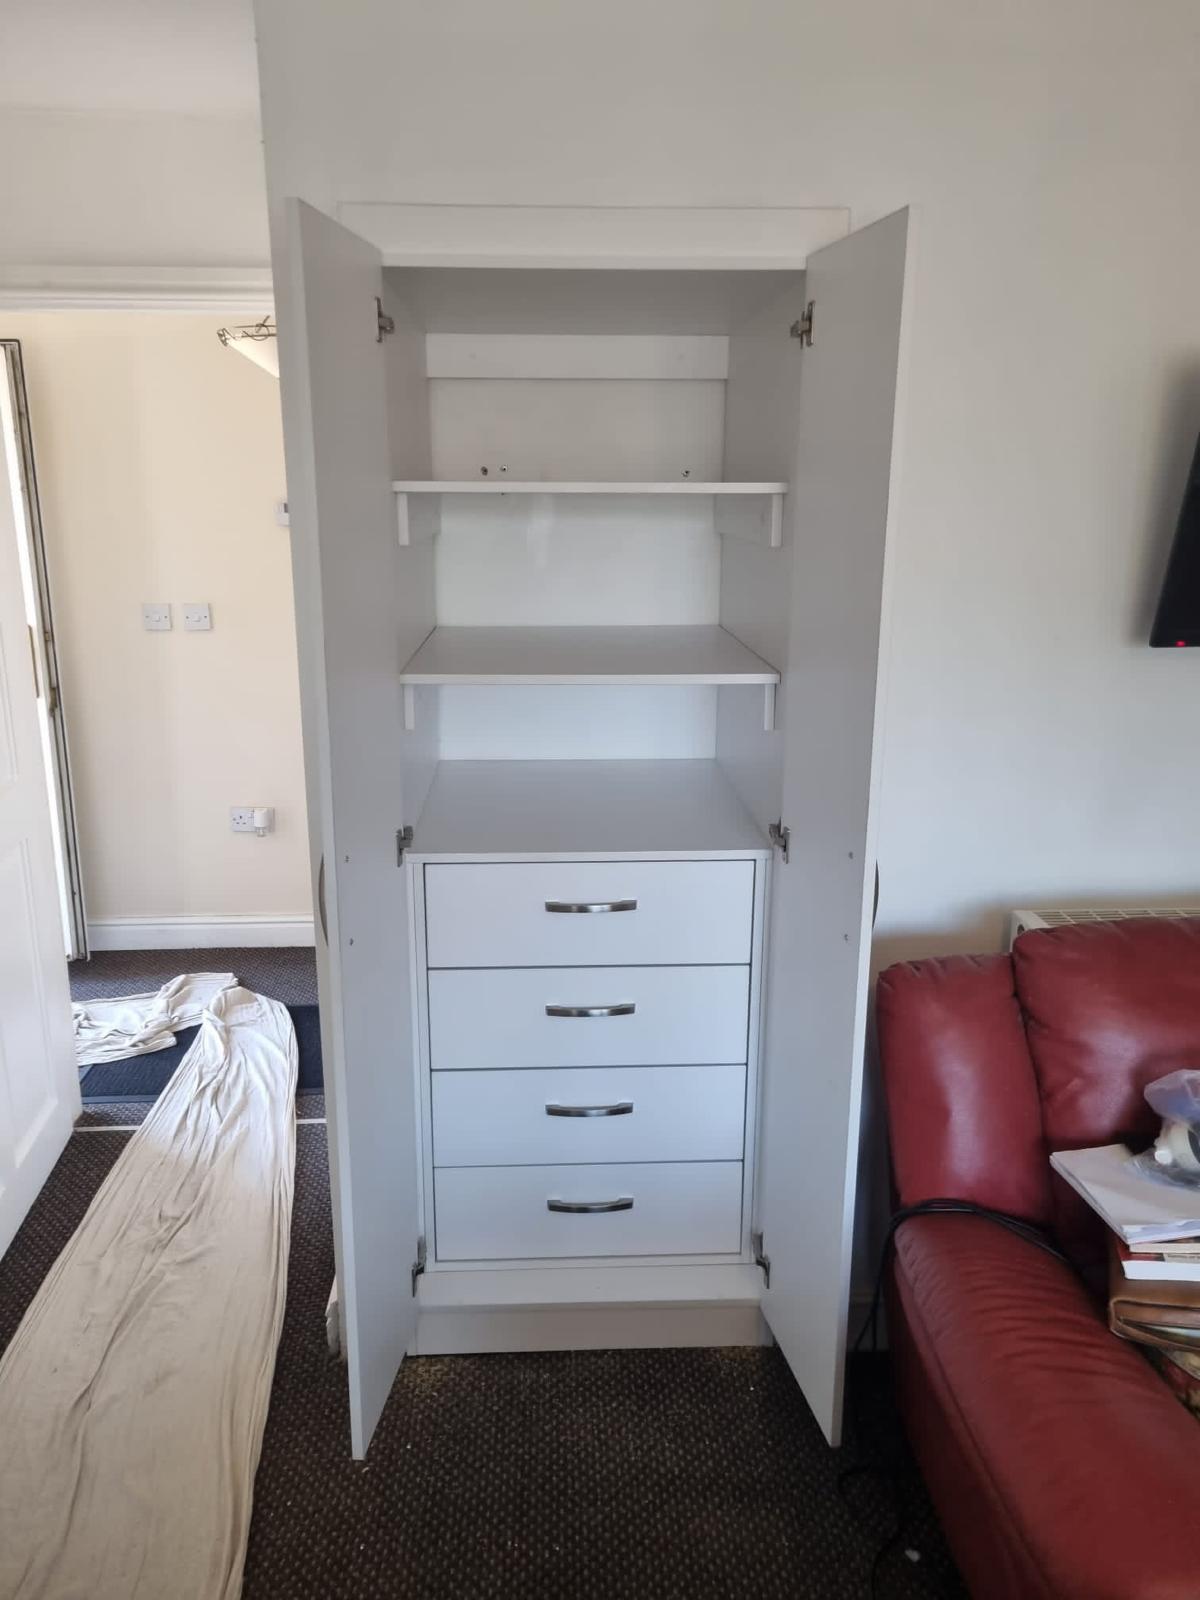 Bespoke Living room storage by glide and slide